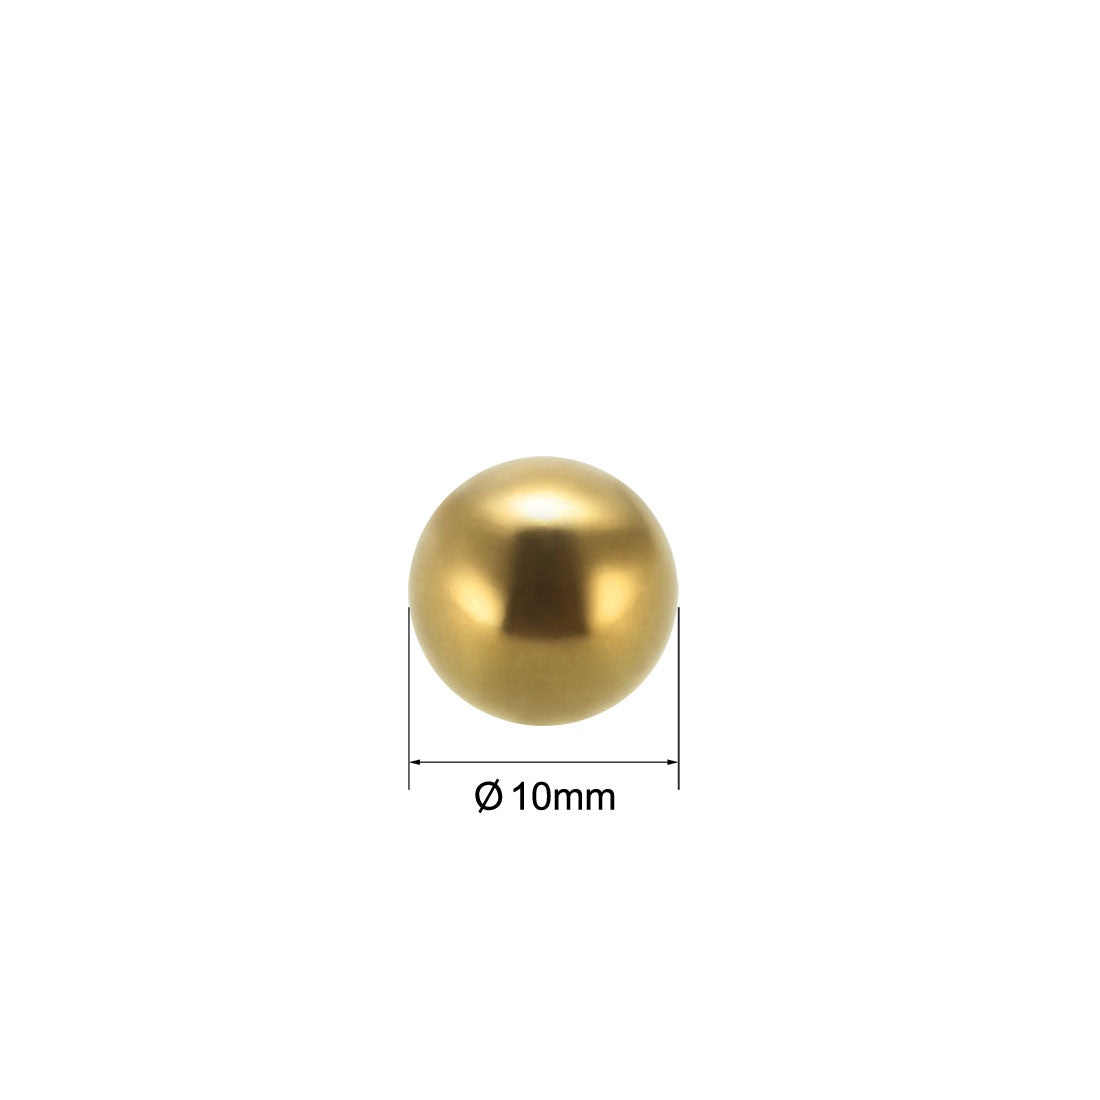 Uxcell Uxcell 10mm Precision Solid Brass Bearing Balls 20pcs